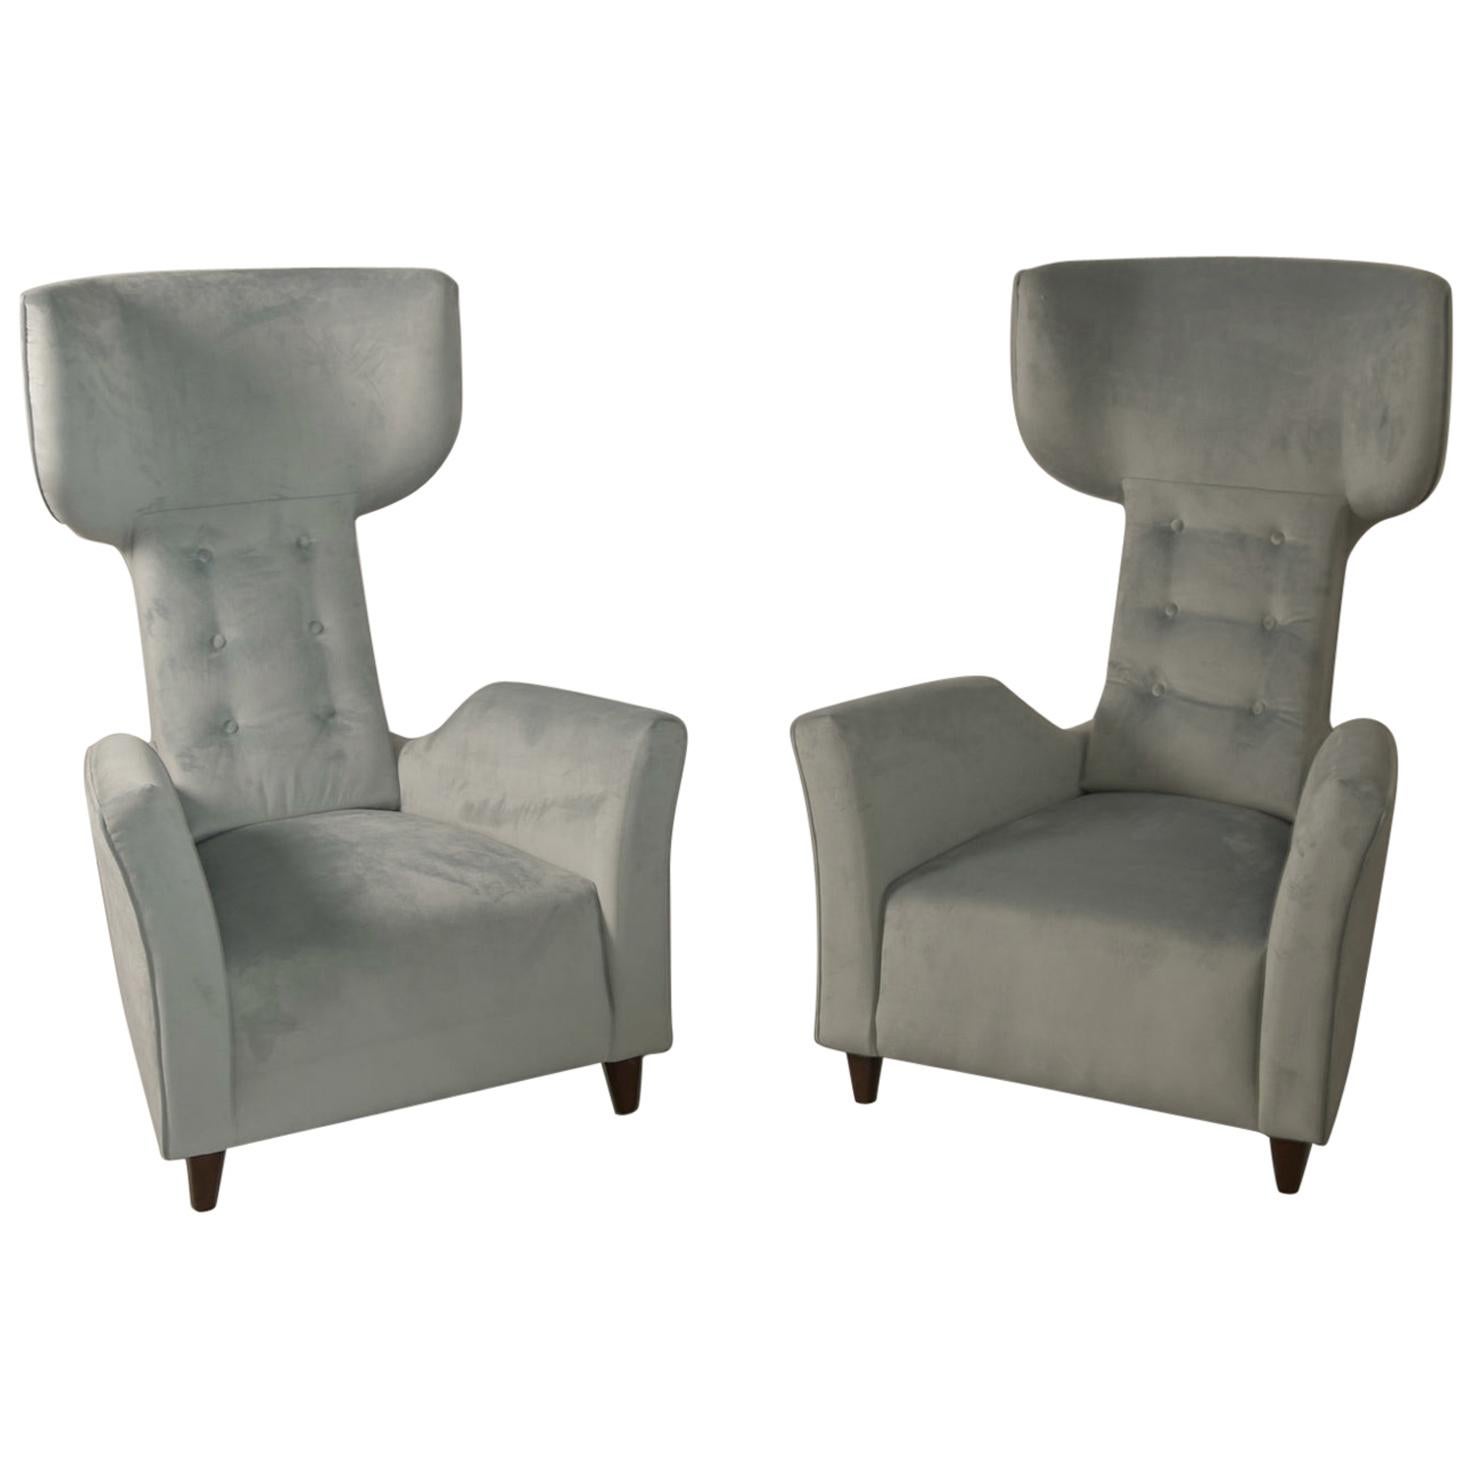 Sculptural Pair of Armchairs Attributed Franco Campi & Carlo Graffi Italy, 1950 For Sale